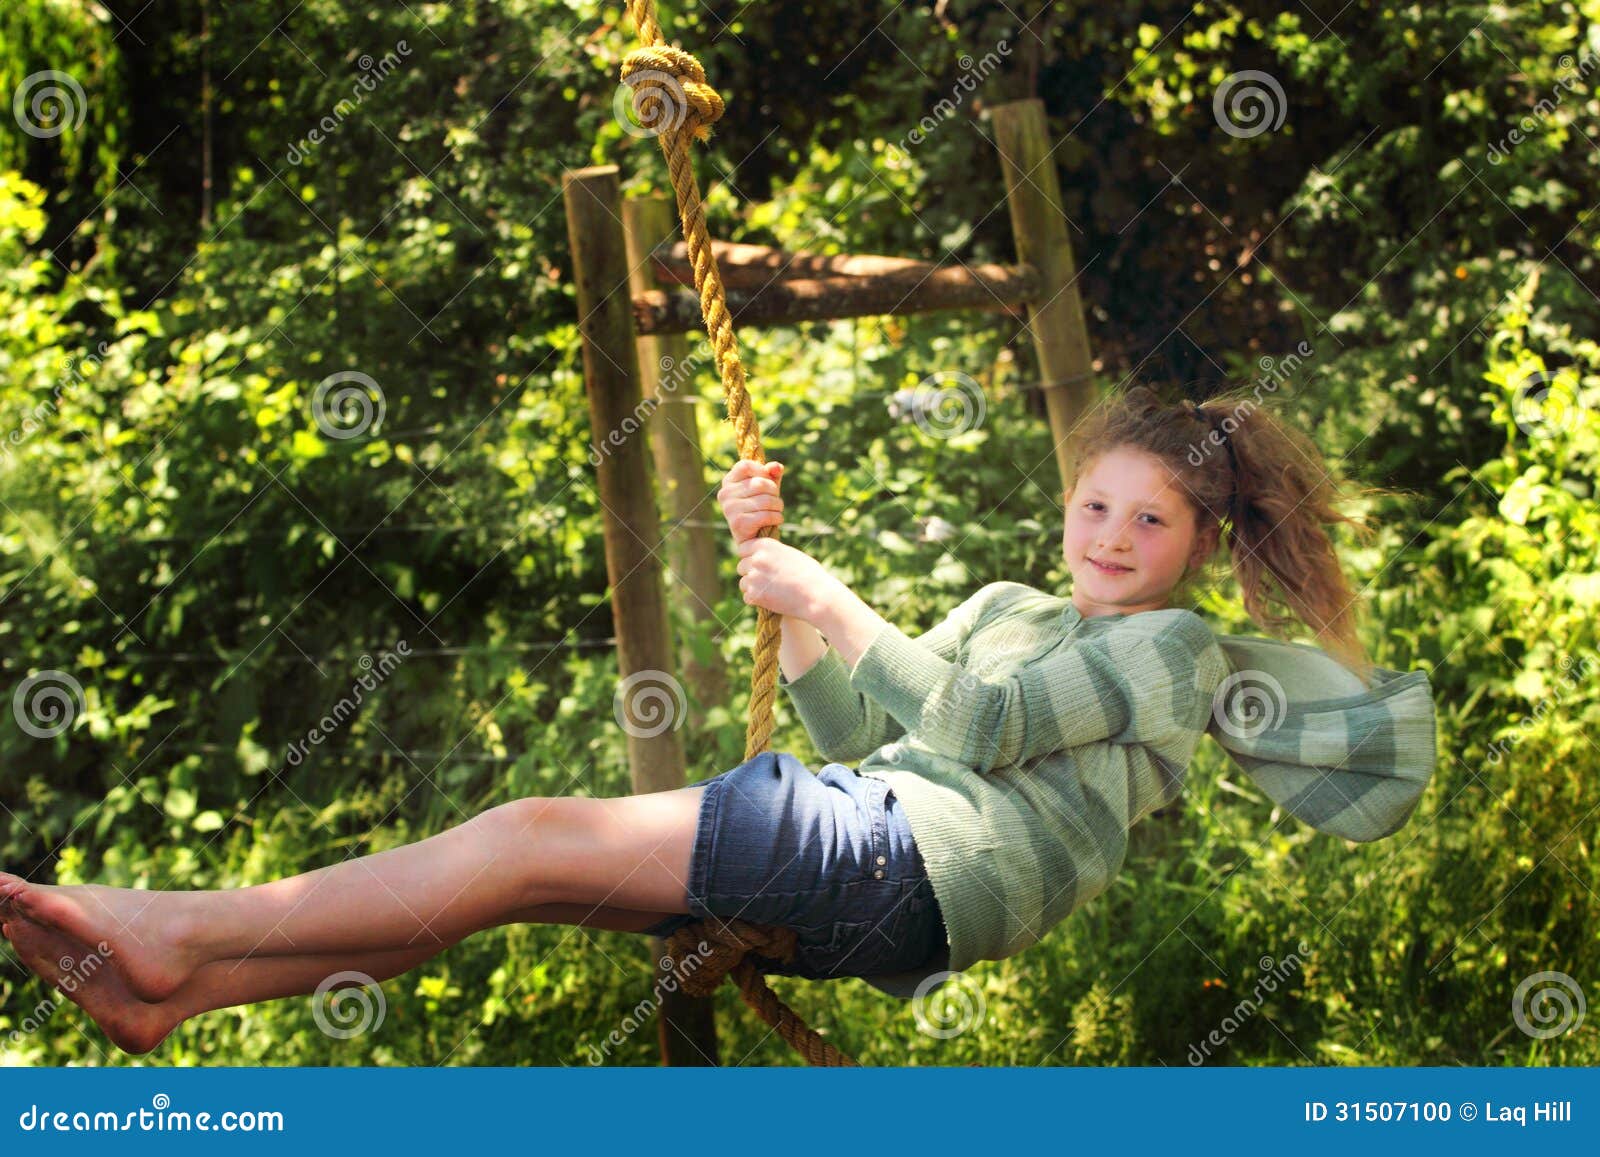 Fun on the Ropes stock photo. Image of grass, girl, rope - 31507100